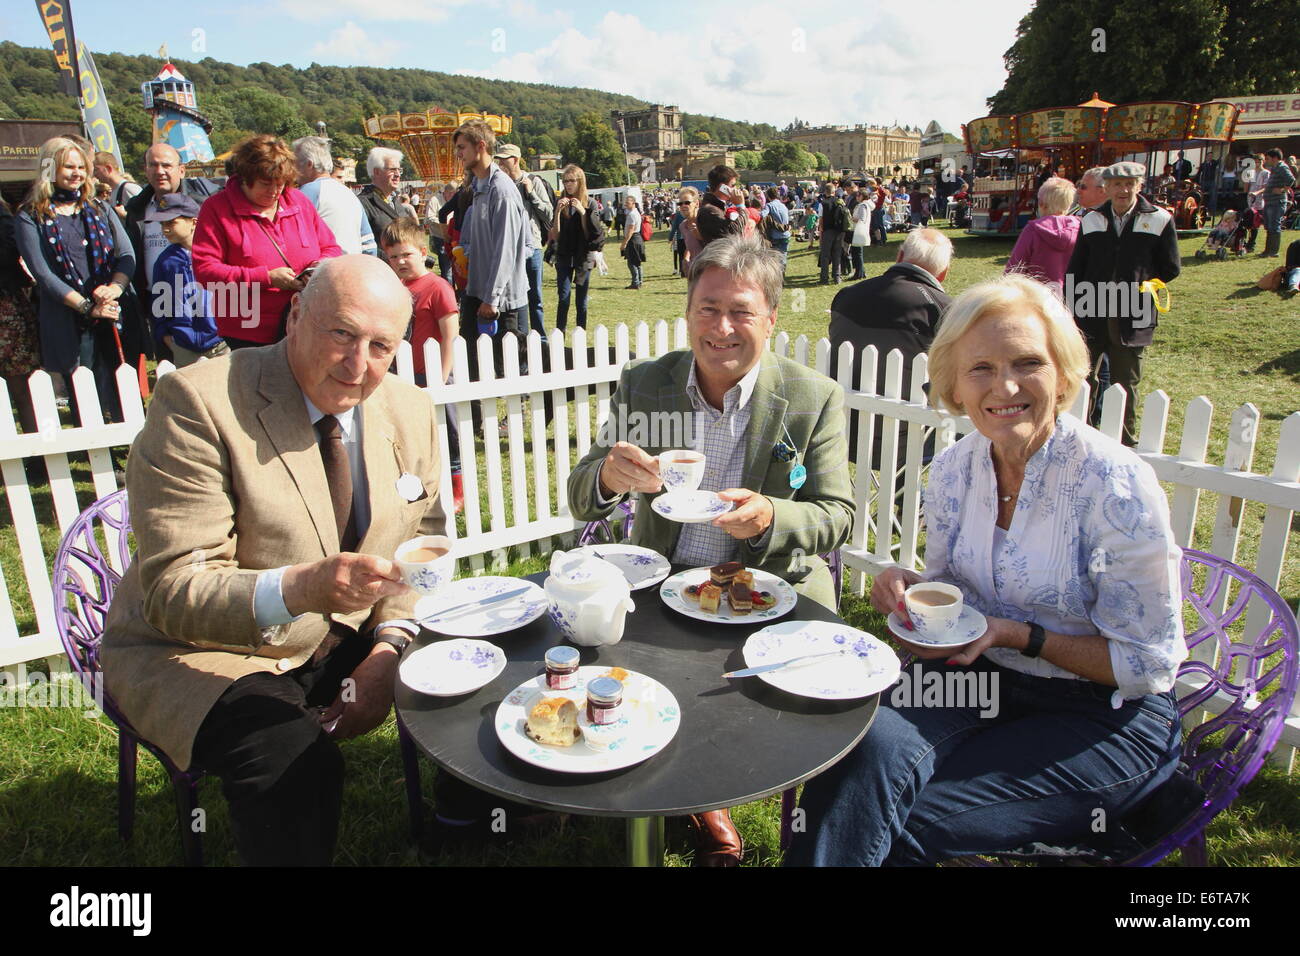 Peak District, Derbyshire, UK. 30 August 2014. Chatsworth House provides the backdrop to afternoon tea for the Duke of Devonshire (L), broadcaster, Alan Titichmarsh (C) and Great British Bake Off television show judge, cook and author, Mary Berry. Hosted by the Duke and Duchess of Devonshire, Chatsworth Country Fair is held in the parkland surrounding Derbyshire stately home, Chatsworth House. The event runs until 31 August. Credit:  Matthew Taylor/Alamy Live News Stock Photo